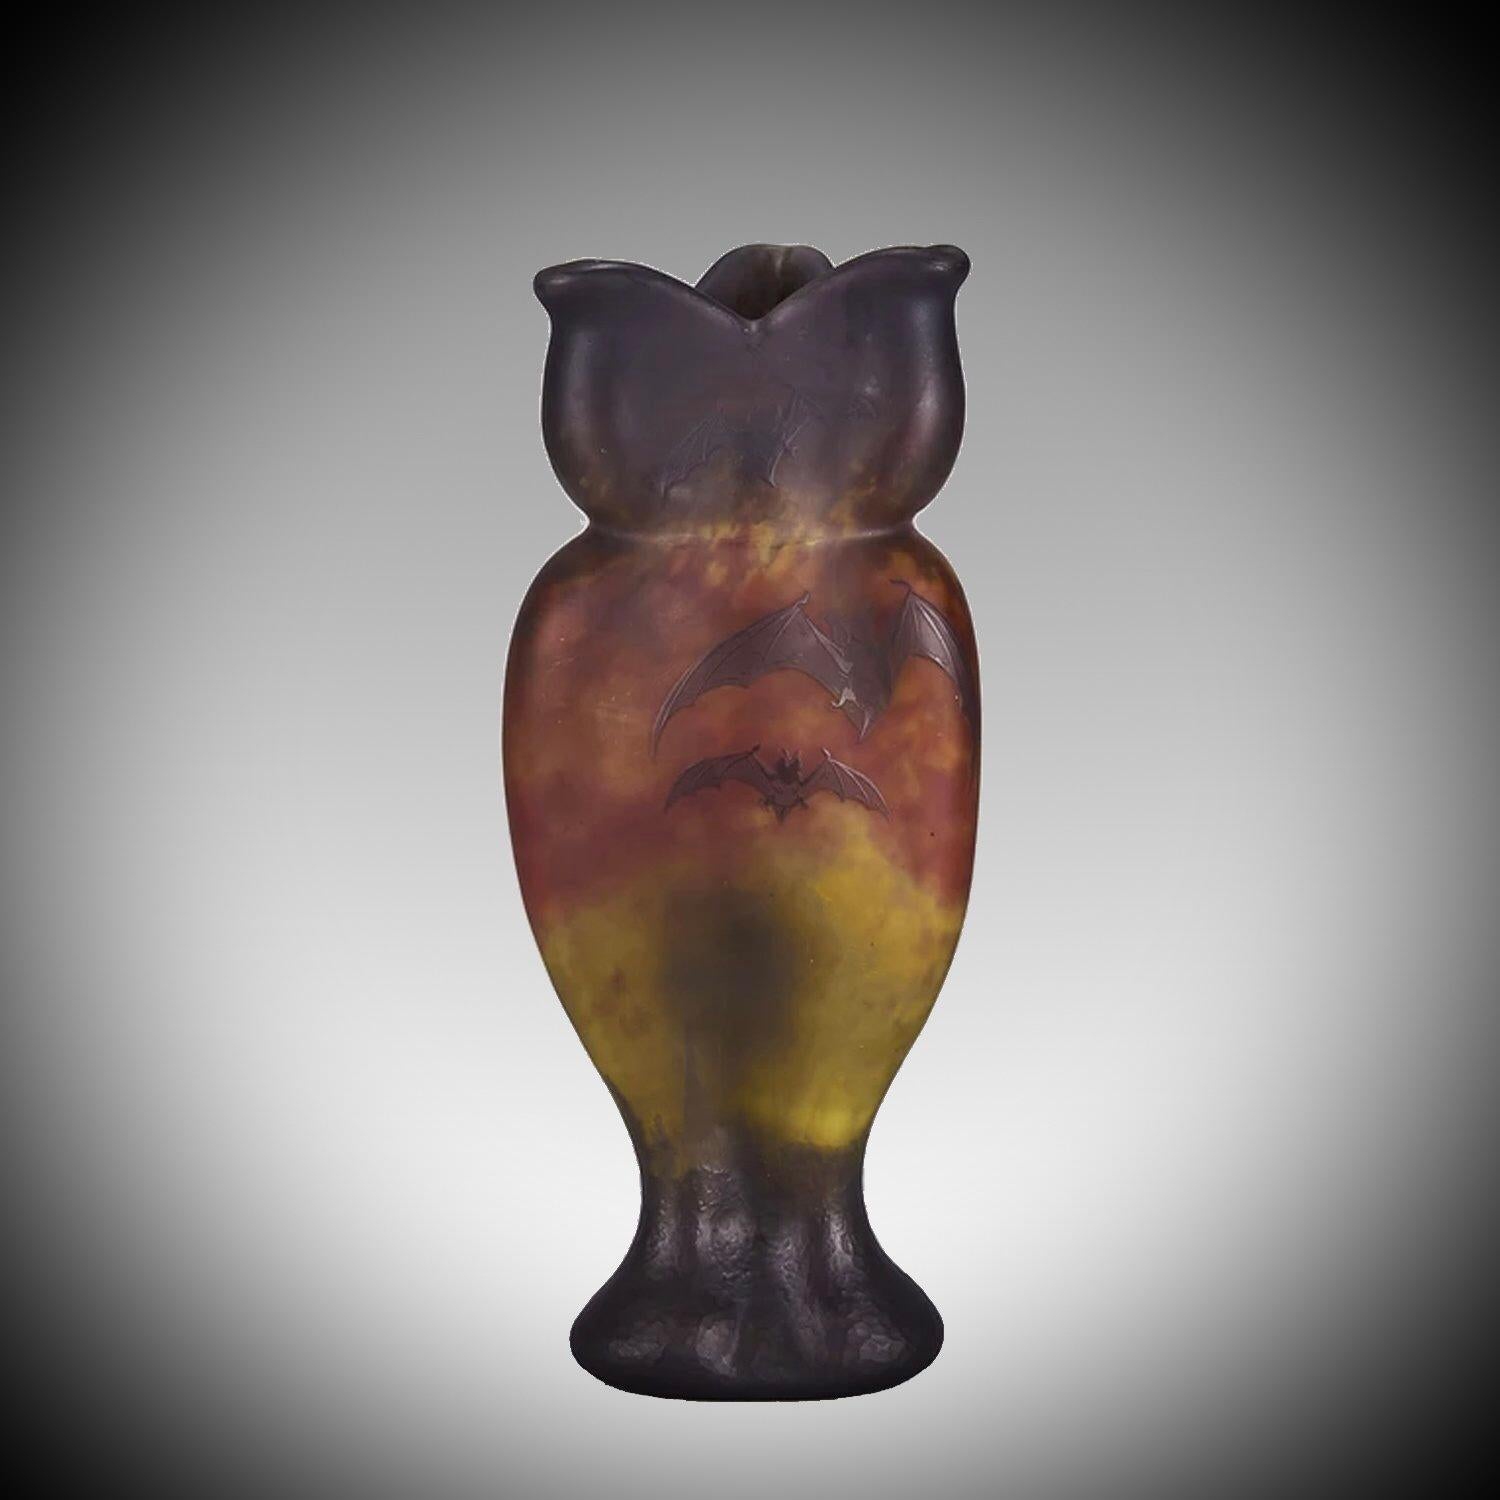 An exceptional and particularly rare Art Nouveau cameo glass vase of triform shape, the lilac layer cut and decorated with bats against a red and yellow sunset sky landscape background. Signed Daum Nancy and with the Cross of Lorraine.